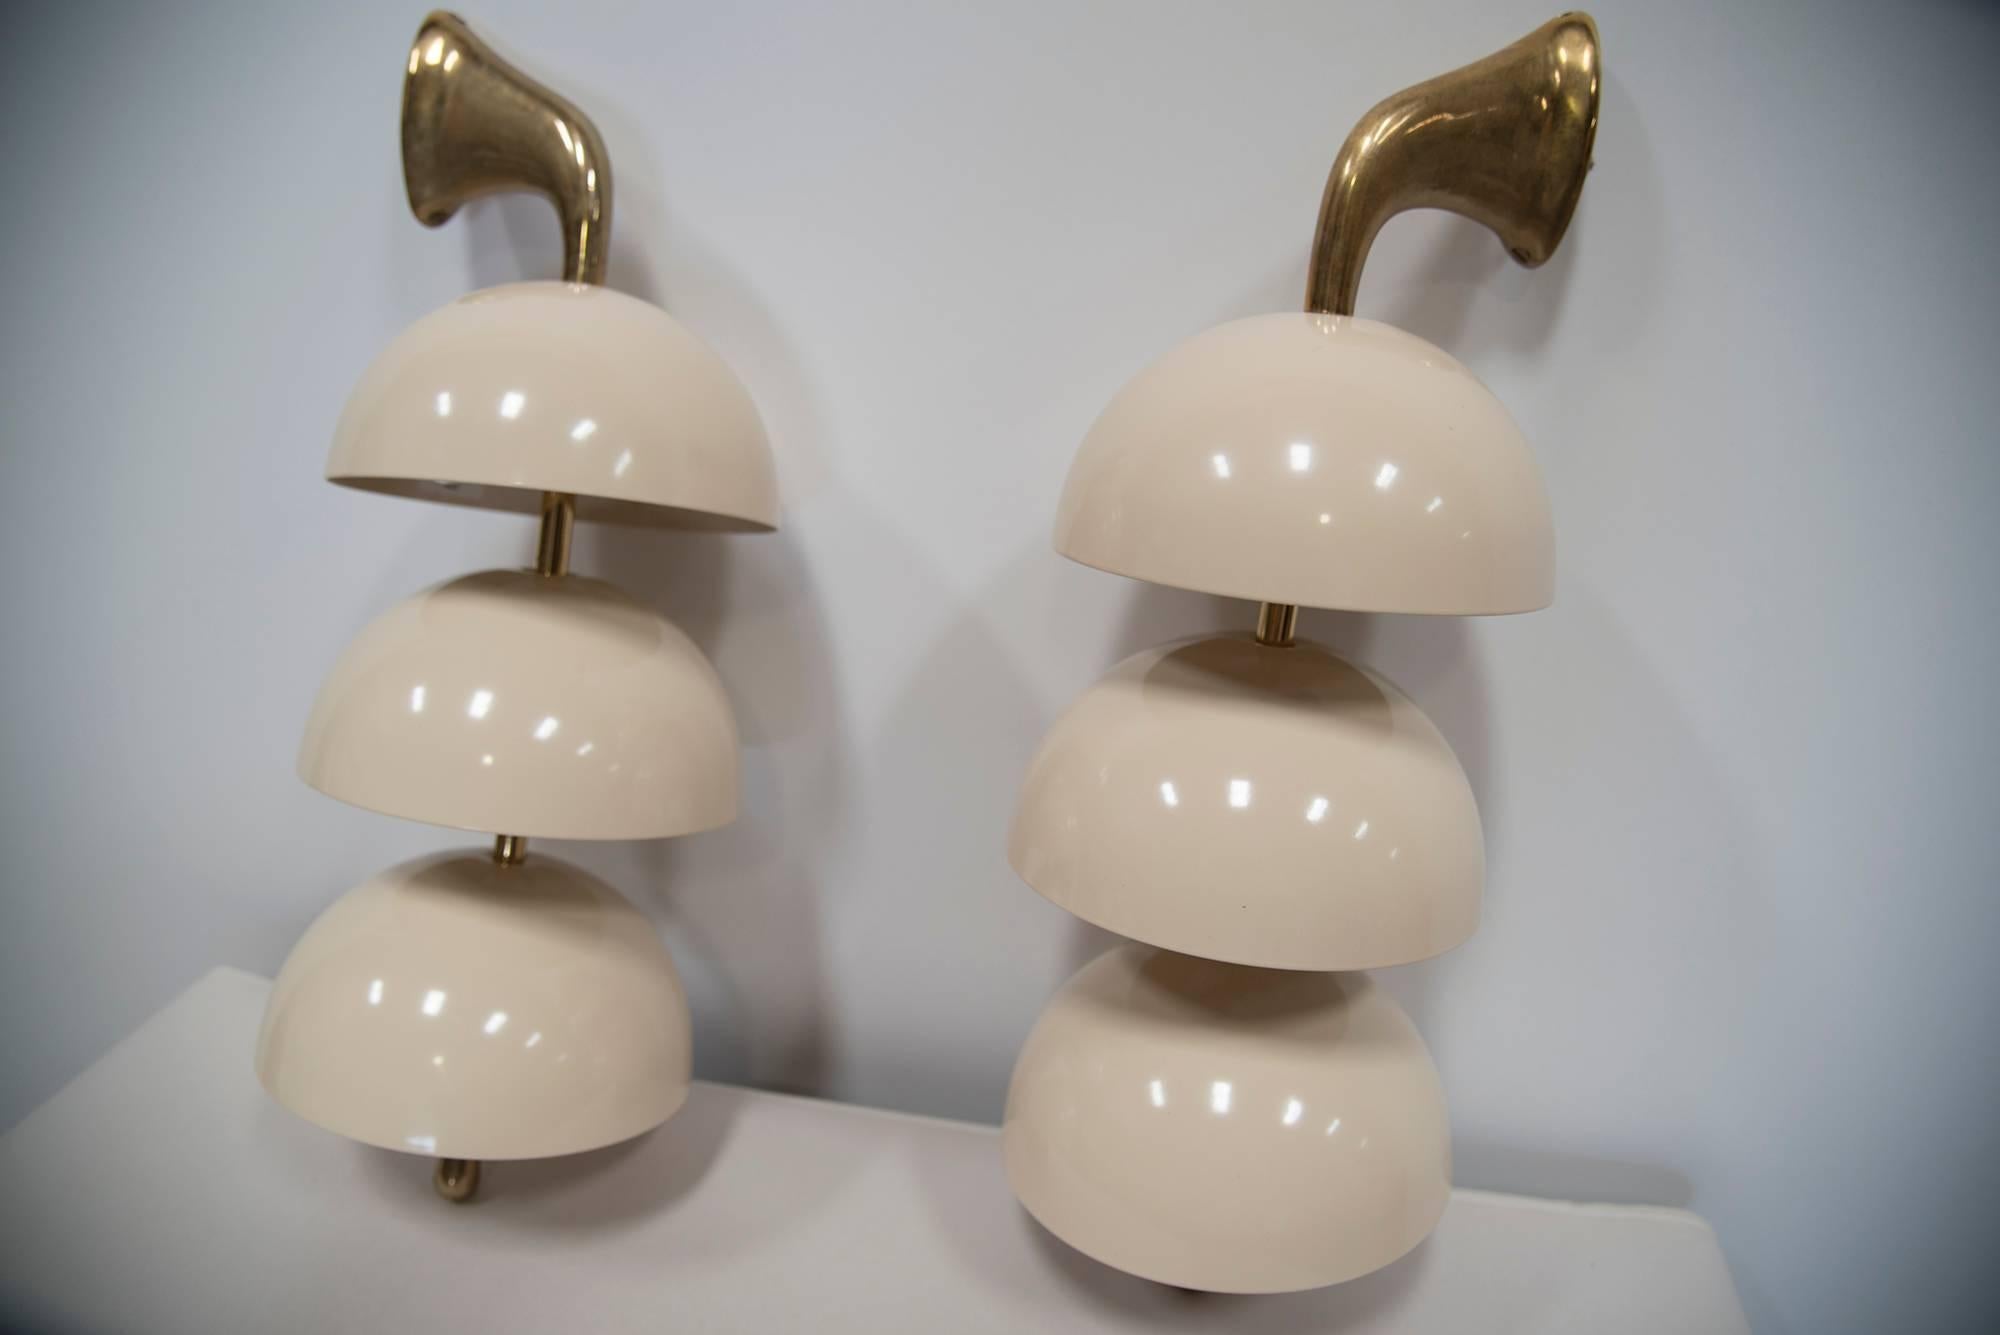 One set [making ONE PAIR] of three-light wall sconces from Stilnovo, Italy. Solid brass and cream-colored lacquer on tole. Three deep round dishes hold and hide the light are mounted on a shaped solid brass upturned, tapering arm finishing into a